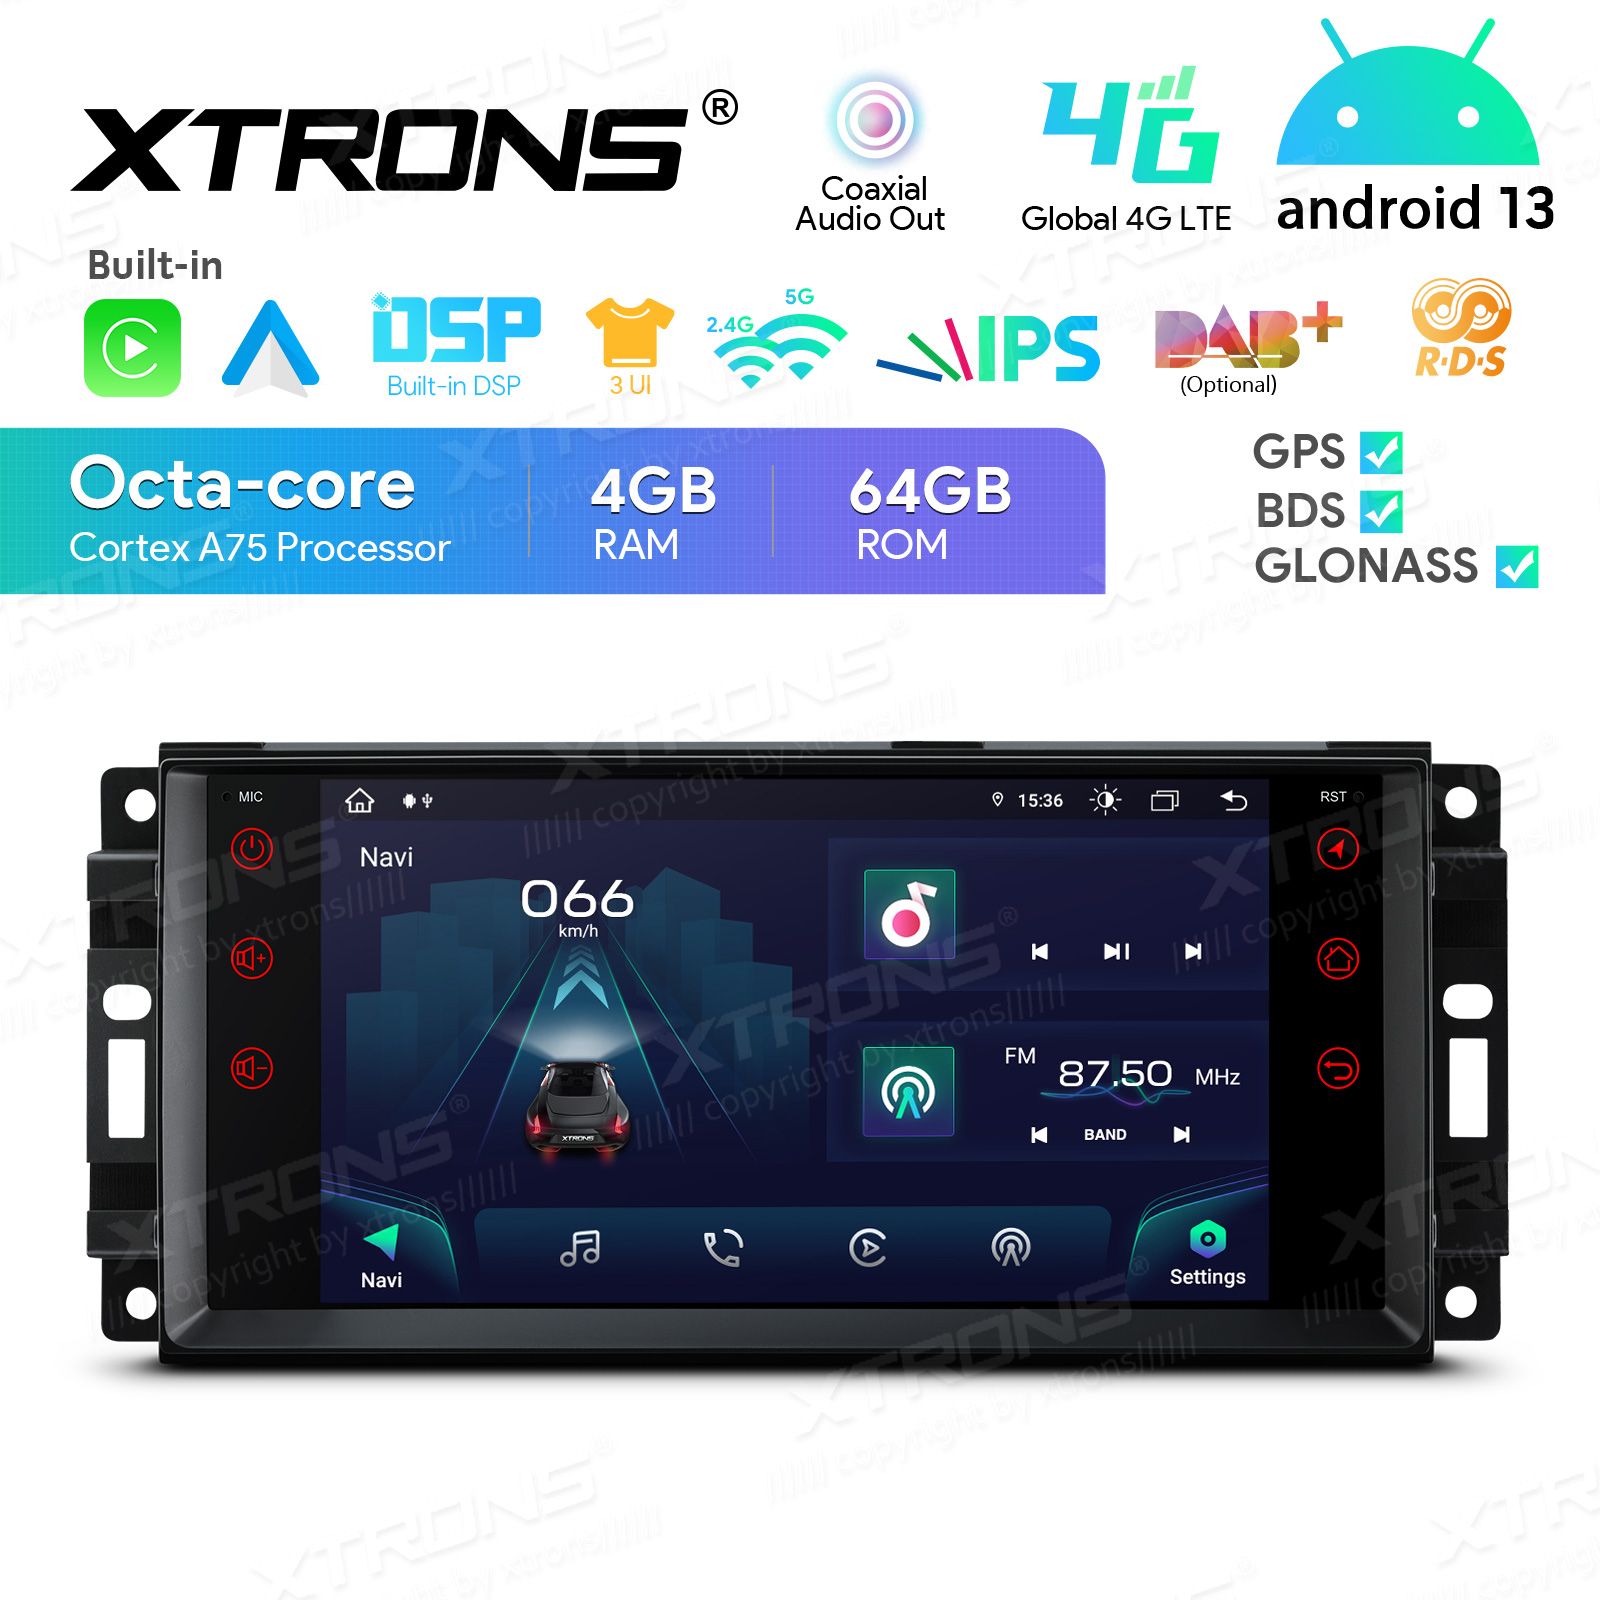 Jeep | Dodge | Chrysler | Grand Cherokee | Compass | Patriot | 300C Android 13  | GPS car radio and multimedia system